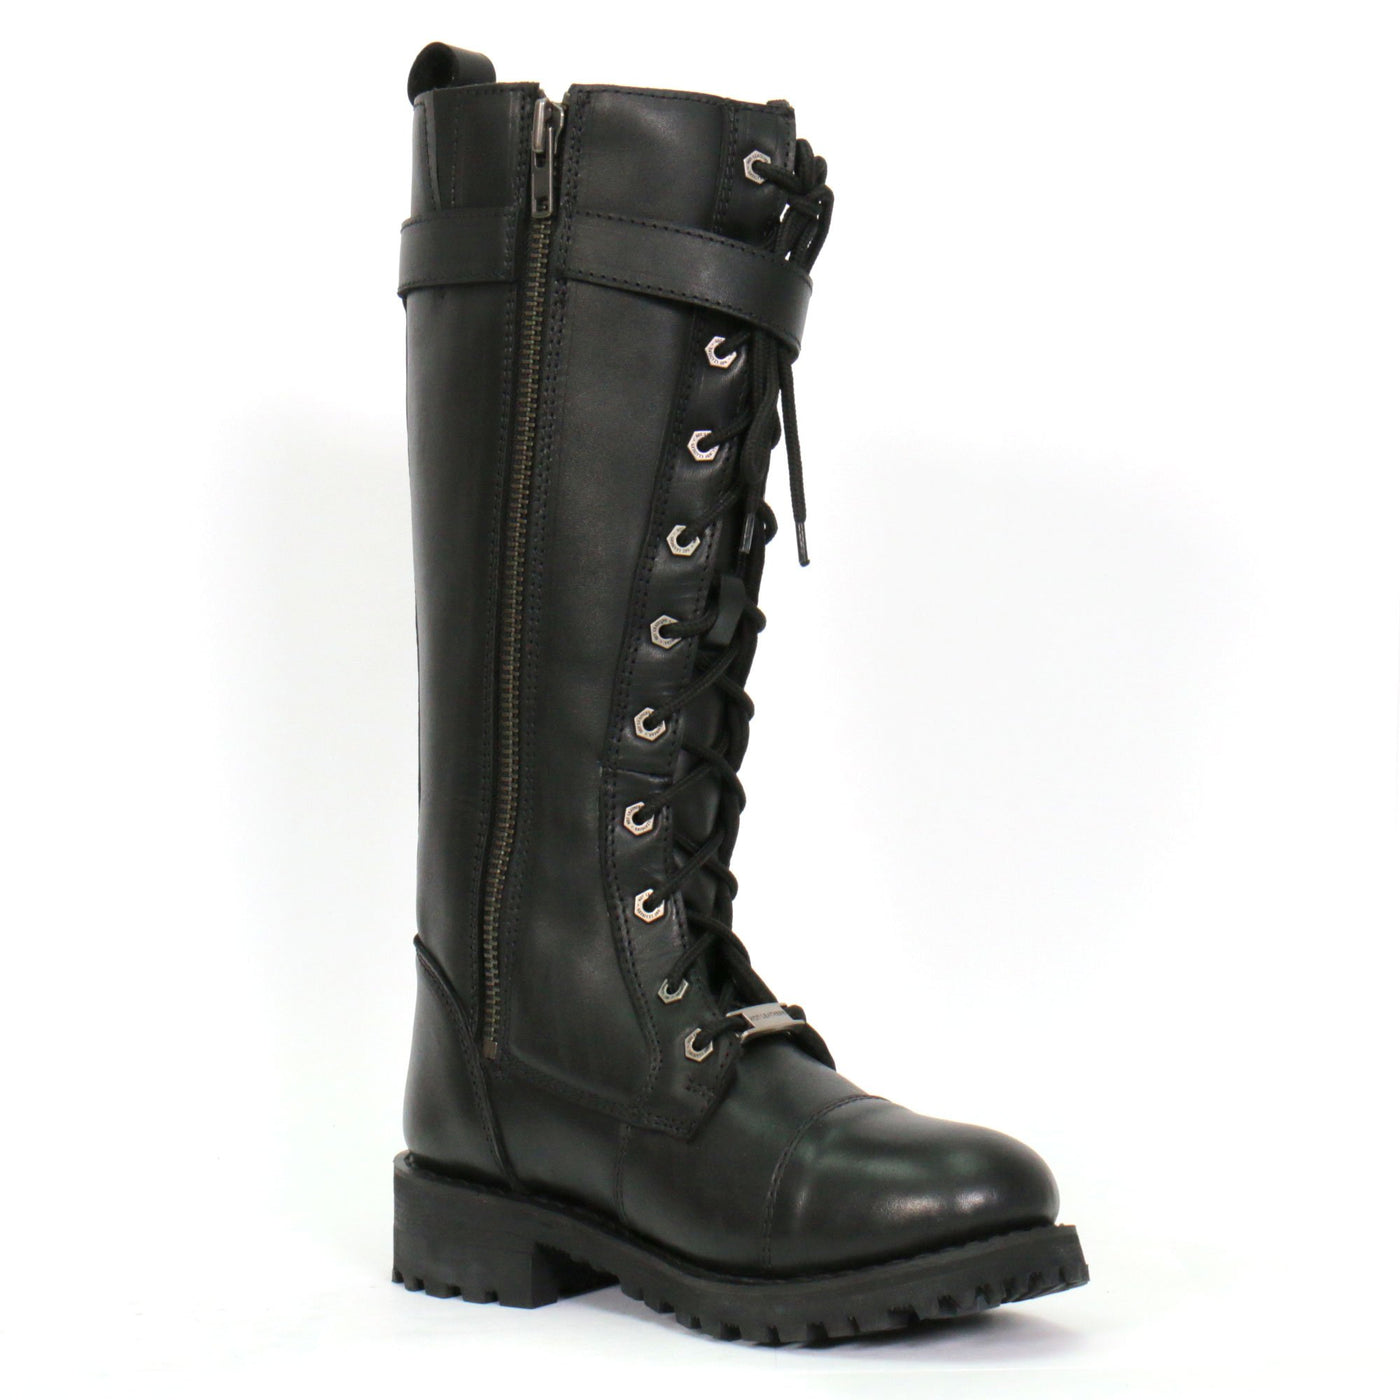 Hot Leathers Women's Knee High Wild Roses Leather Boots is a women's black boot with laces and buckles made of top grain leather.